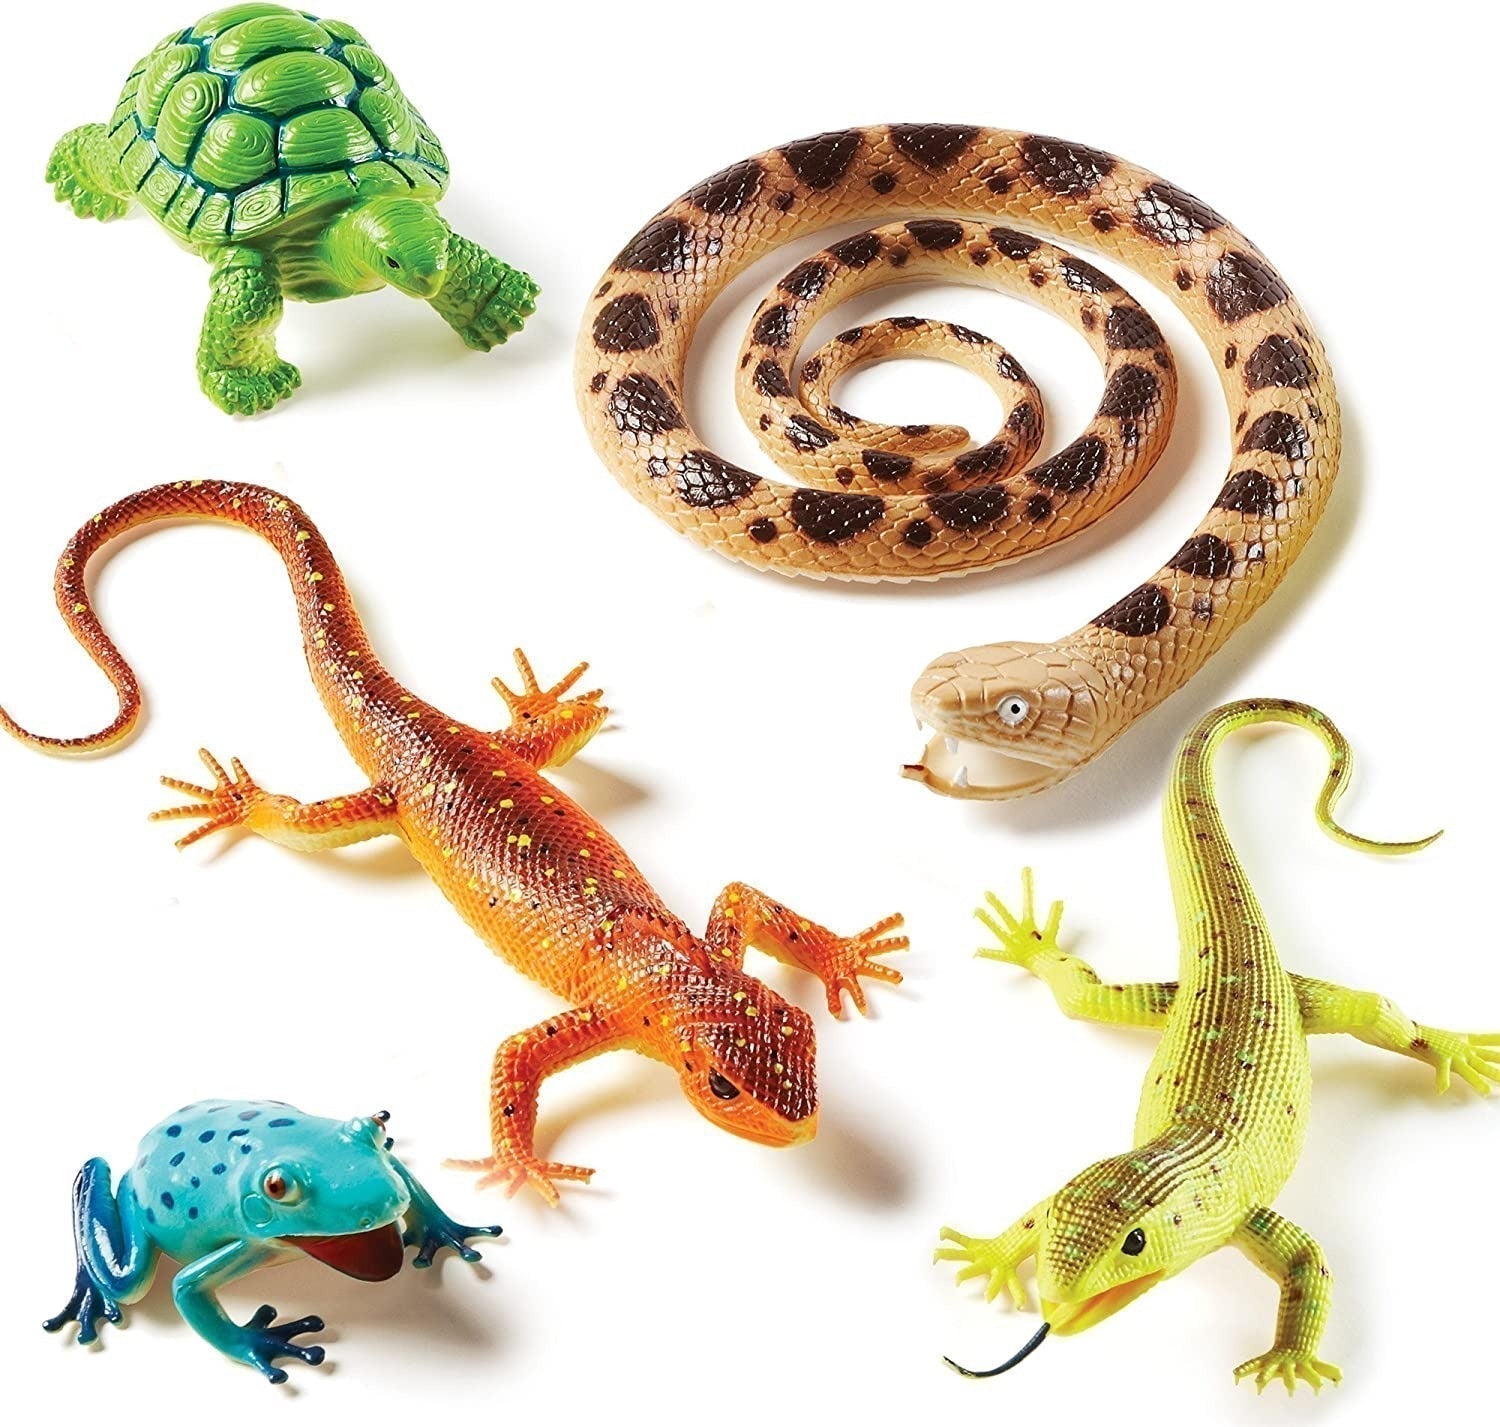 Jumbo Reptiles & Amphibians, Ideal for imaginative play, this durable and realistically detailed Jumbo Reptiles and Amphibians Set is perfectly sized for little hands. This Jumbo Reptiles & Amphibians set includes 5 animals: gecko, snake, tree frog, tortoise and iguana. Teach young learners about the slither of a snake, the chirp of a colourful tree frog, and the darting glances of a gecko with this five-piece set (which also includes a tortoise and an iguana), or let imaginations run from one wild kingdom 